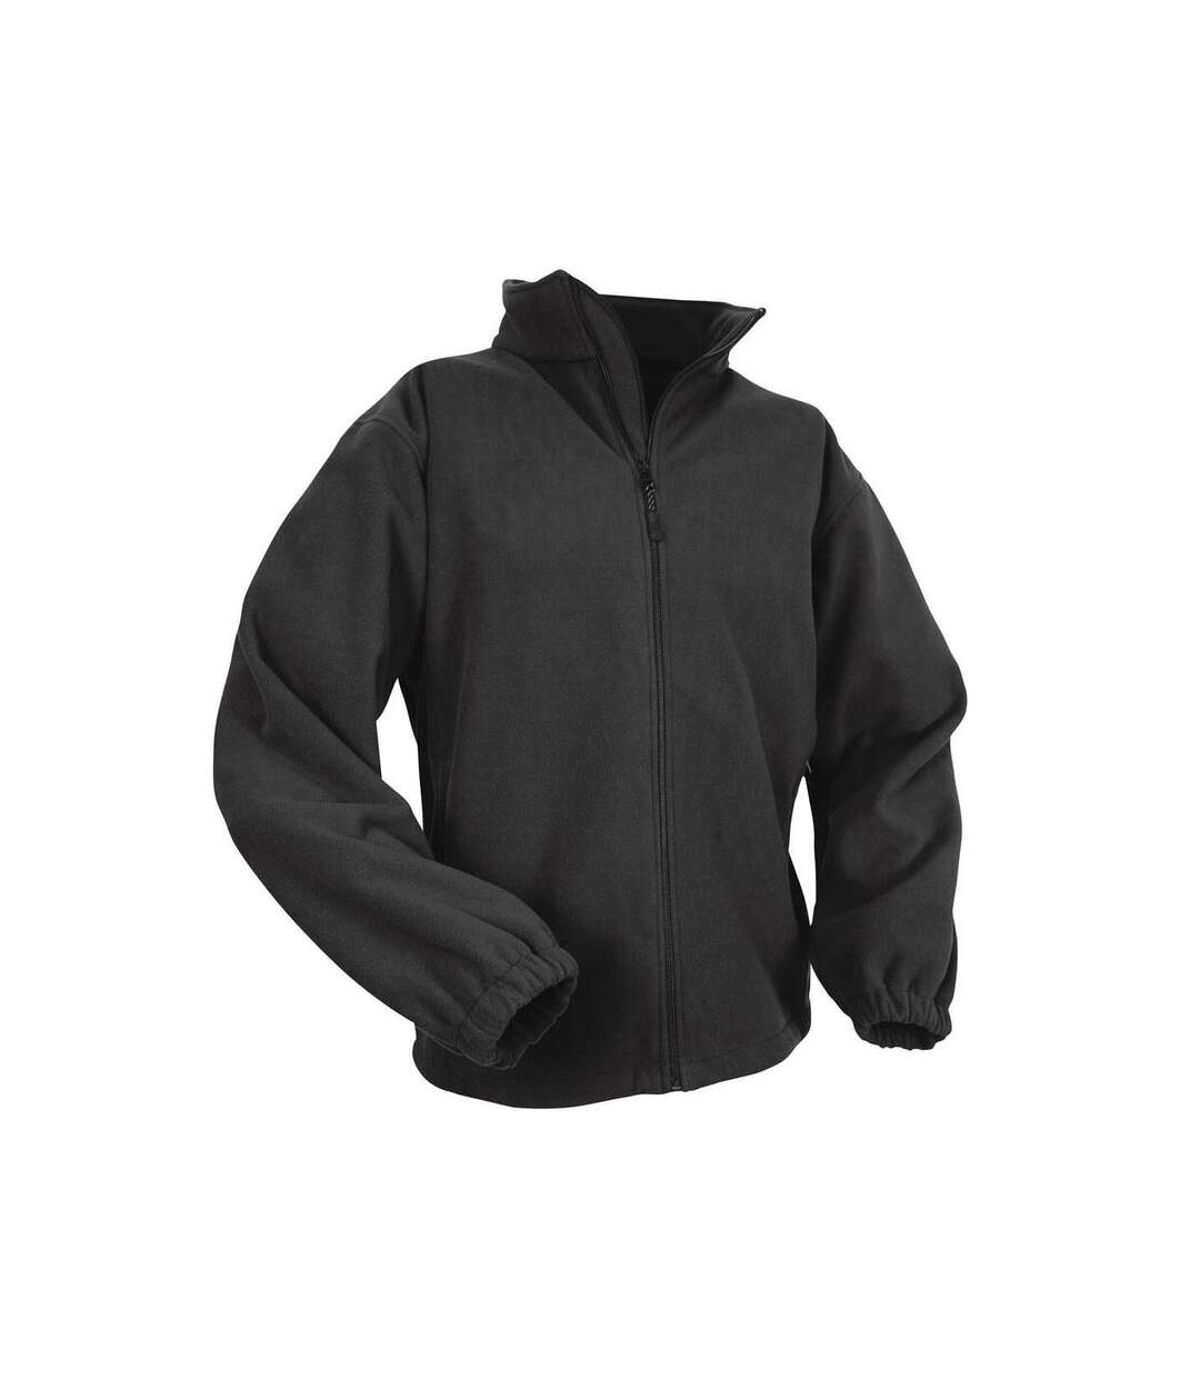 Result Mens Extreme Climate Stopper Water Repellent Fleece Breathable Jacket (Black) - UTBC847